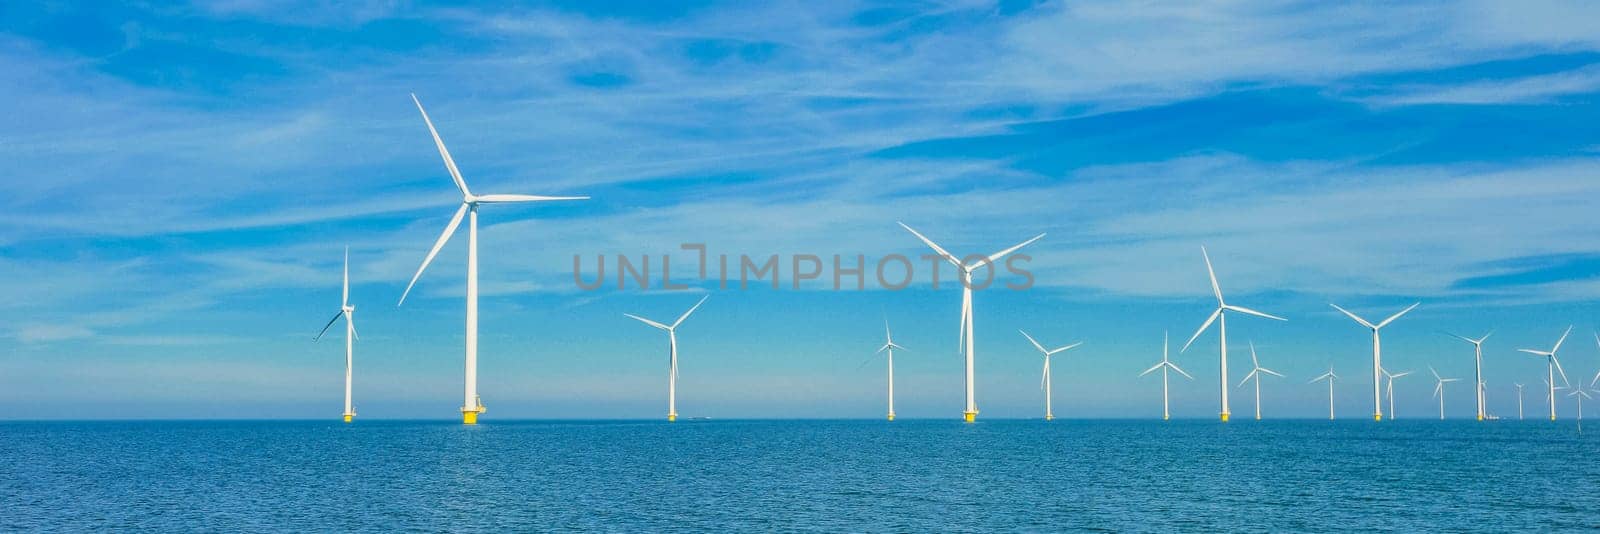 Drone view at windmill turbines, Windmill park with clouds and a blue sky, windmill park in the ocean aerial view with wind turbine Flevoland Netherlands